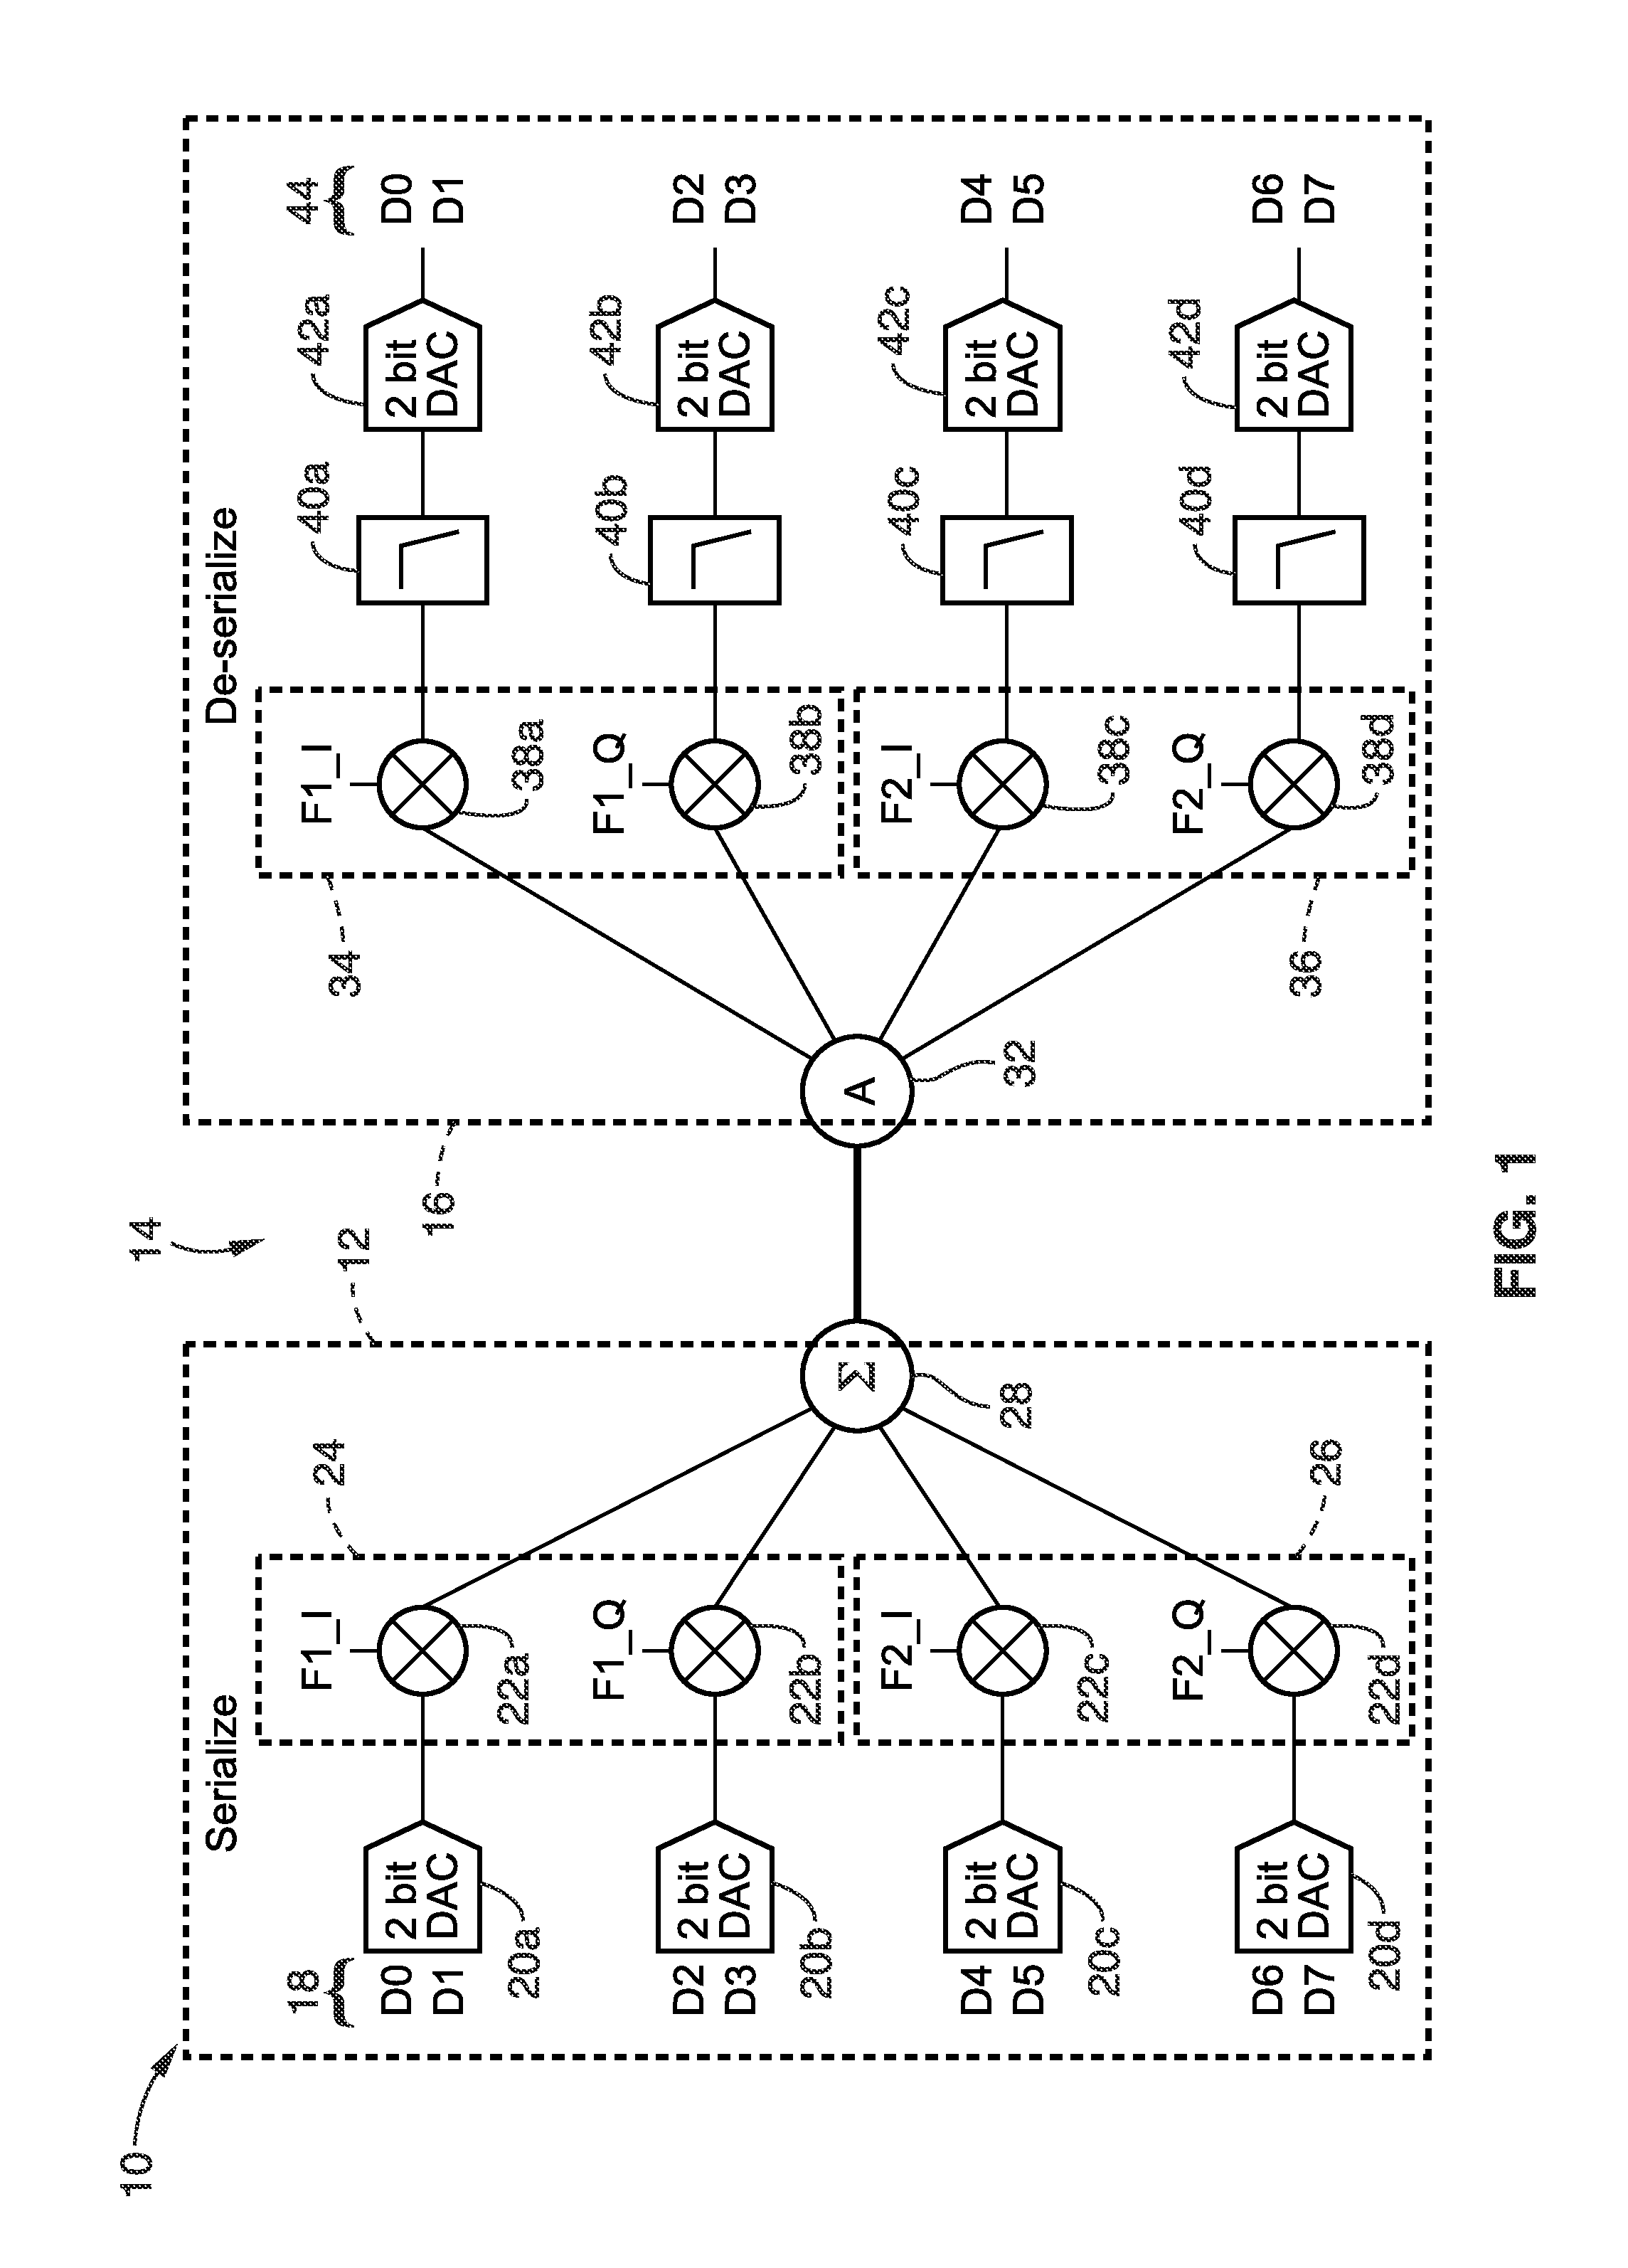 Scalable serial/de-serial I/O for chip-to-chip connection based on multi-frequency QAM scheme